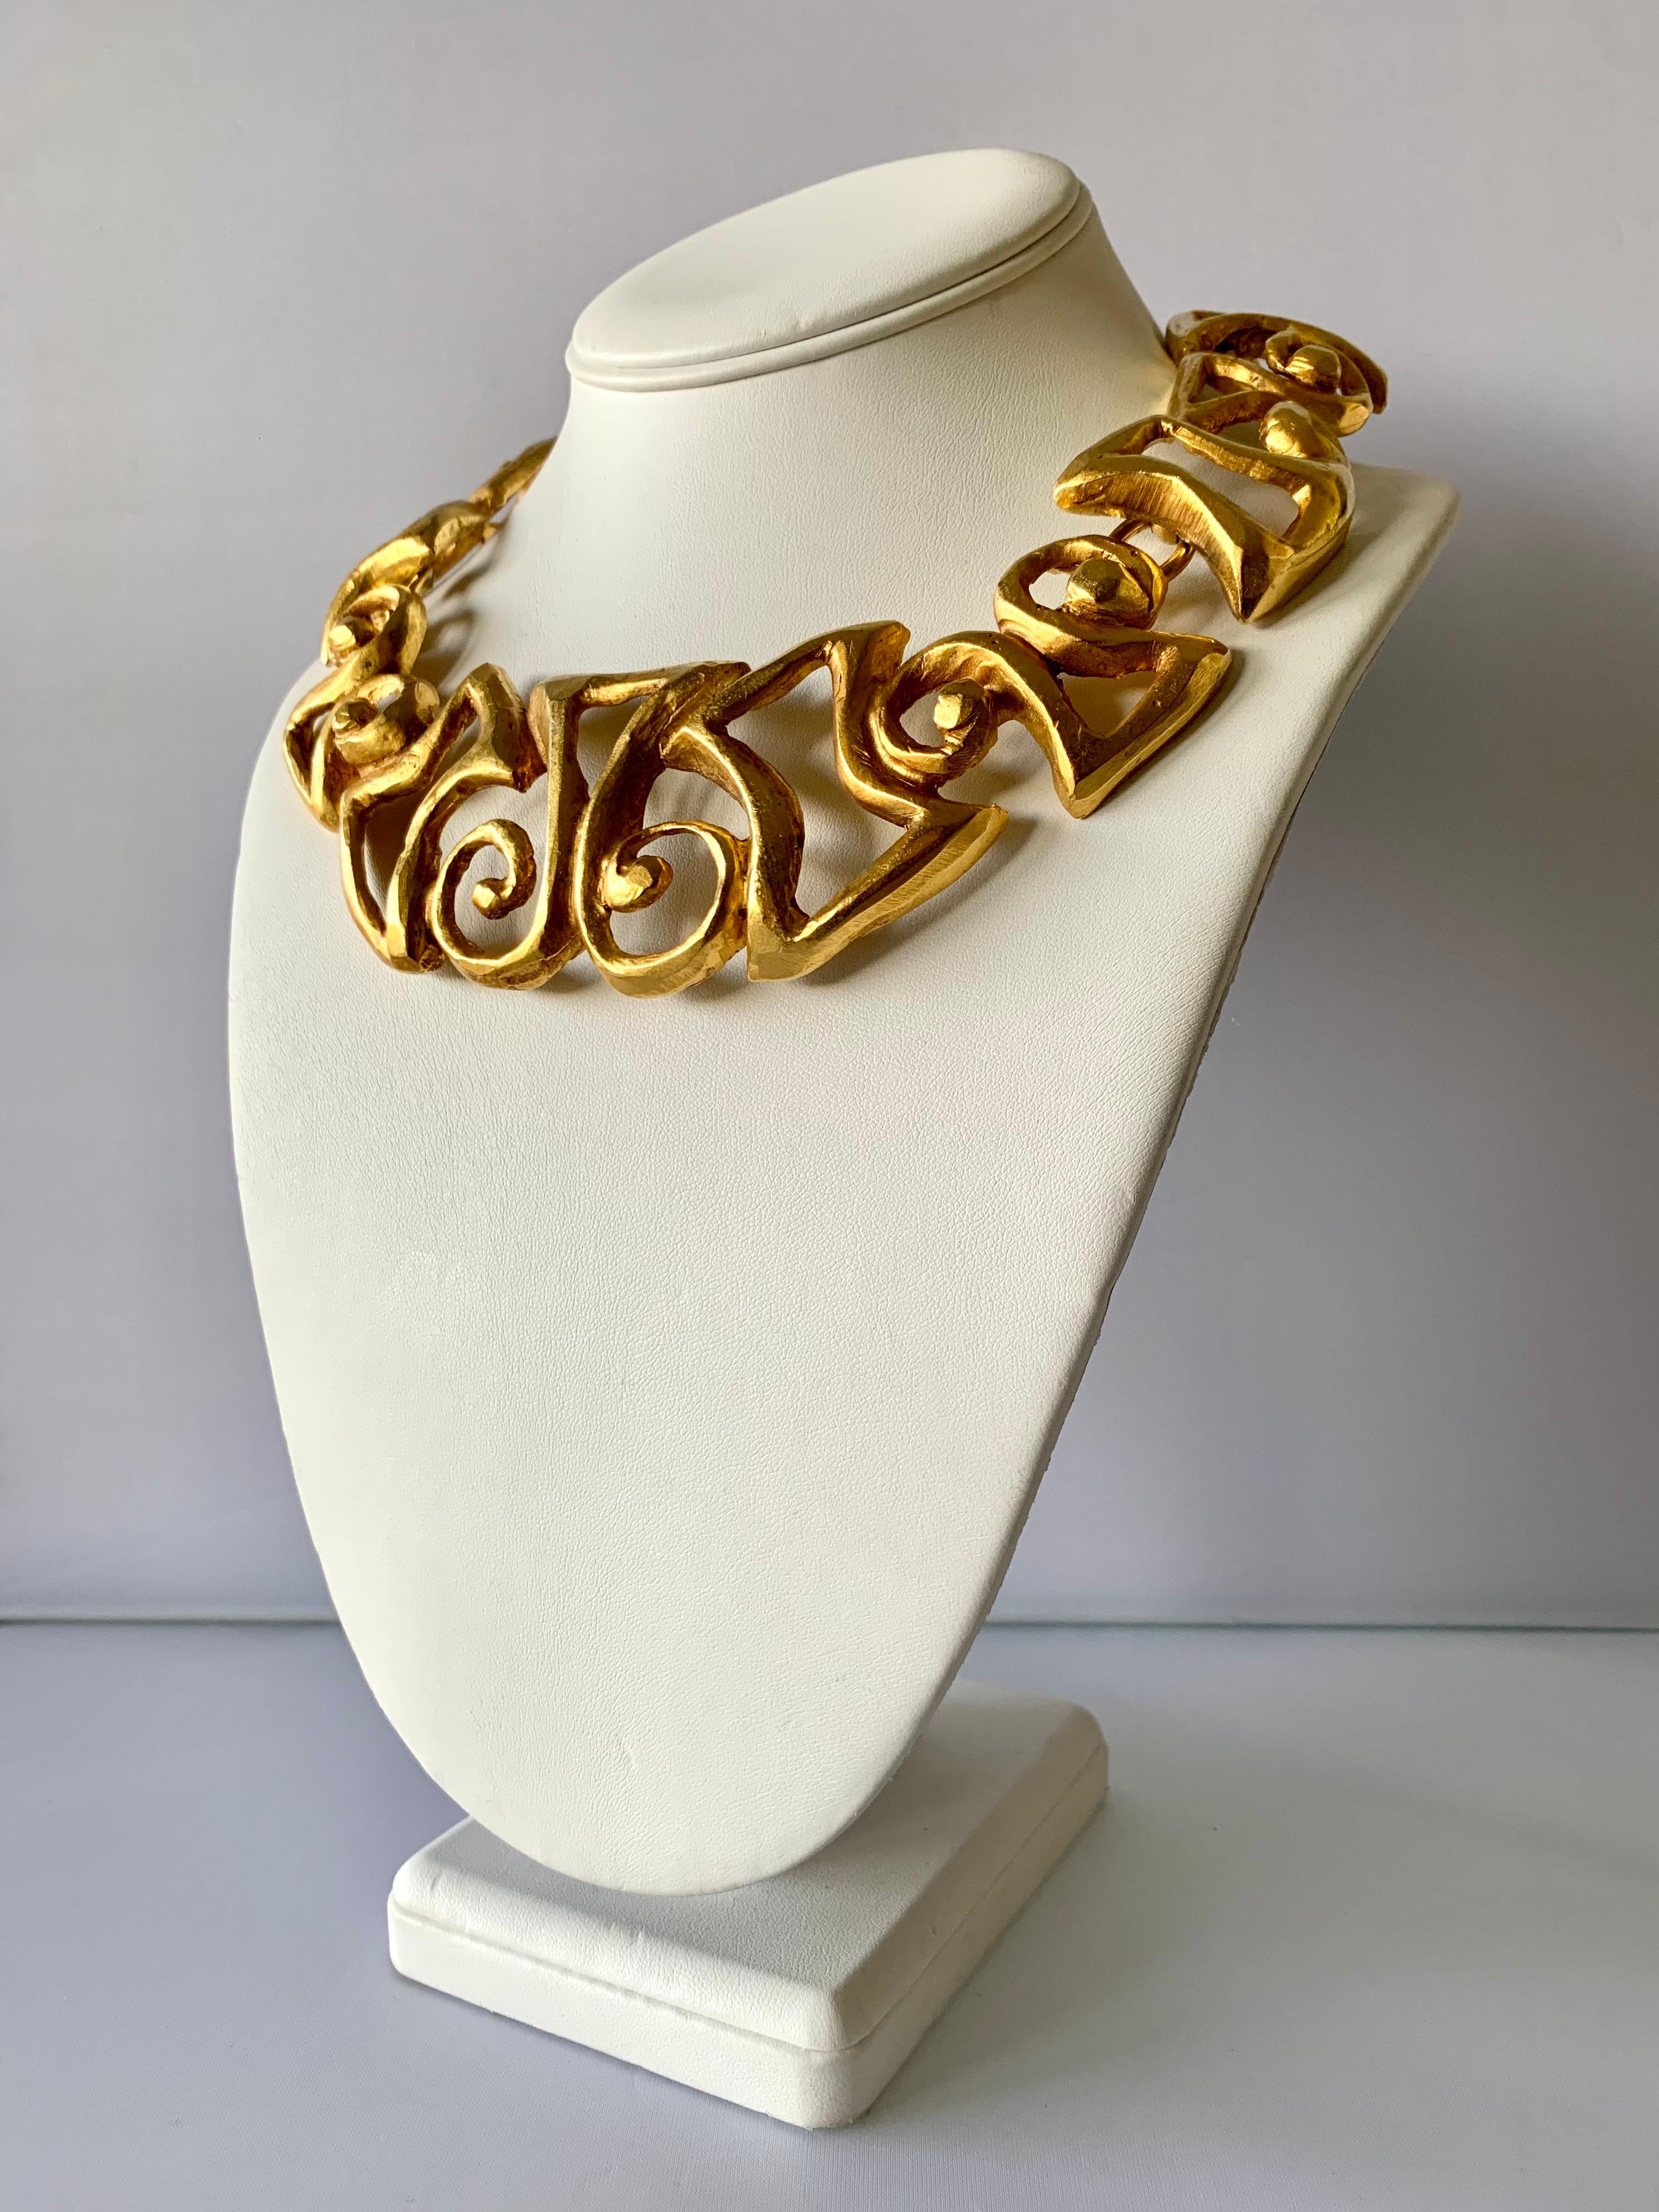 Vintage Christian Lacroix Gold Tribal Statement Necklace  In Excellent Condition For Sale In Palm Springs, CA